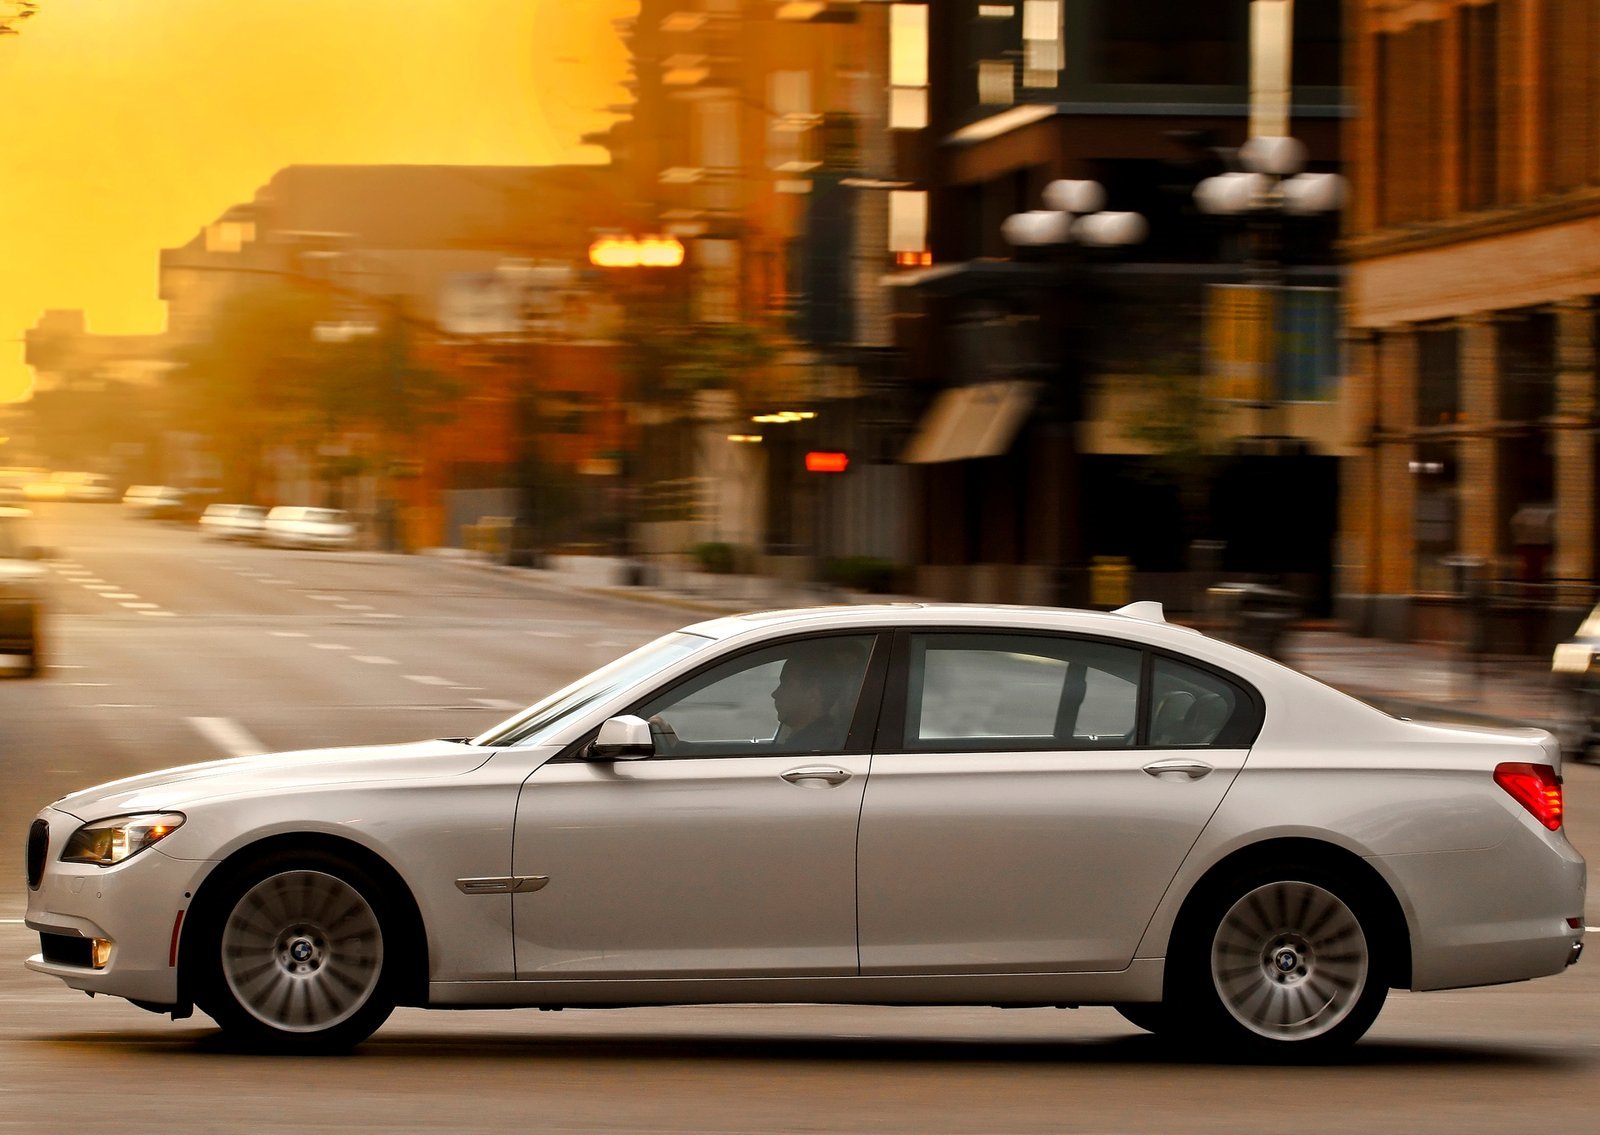 BMW 7 Series Exterior Side View